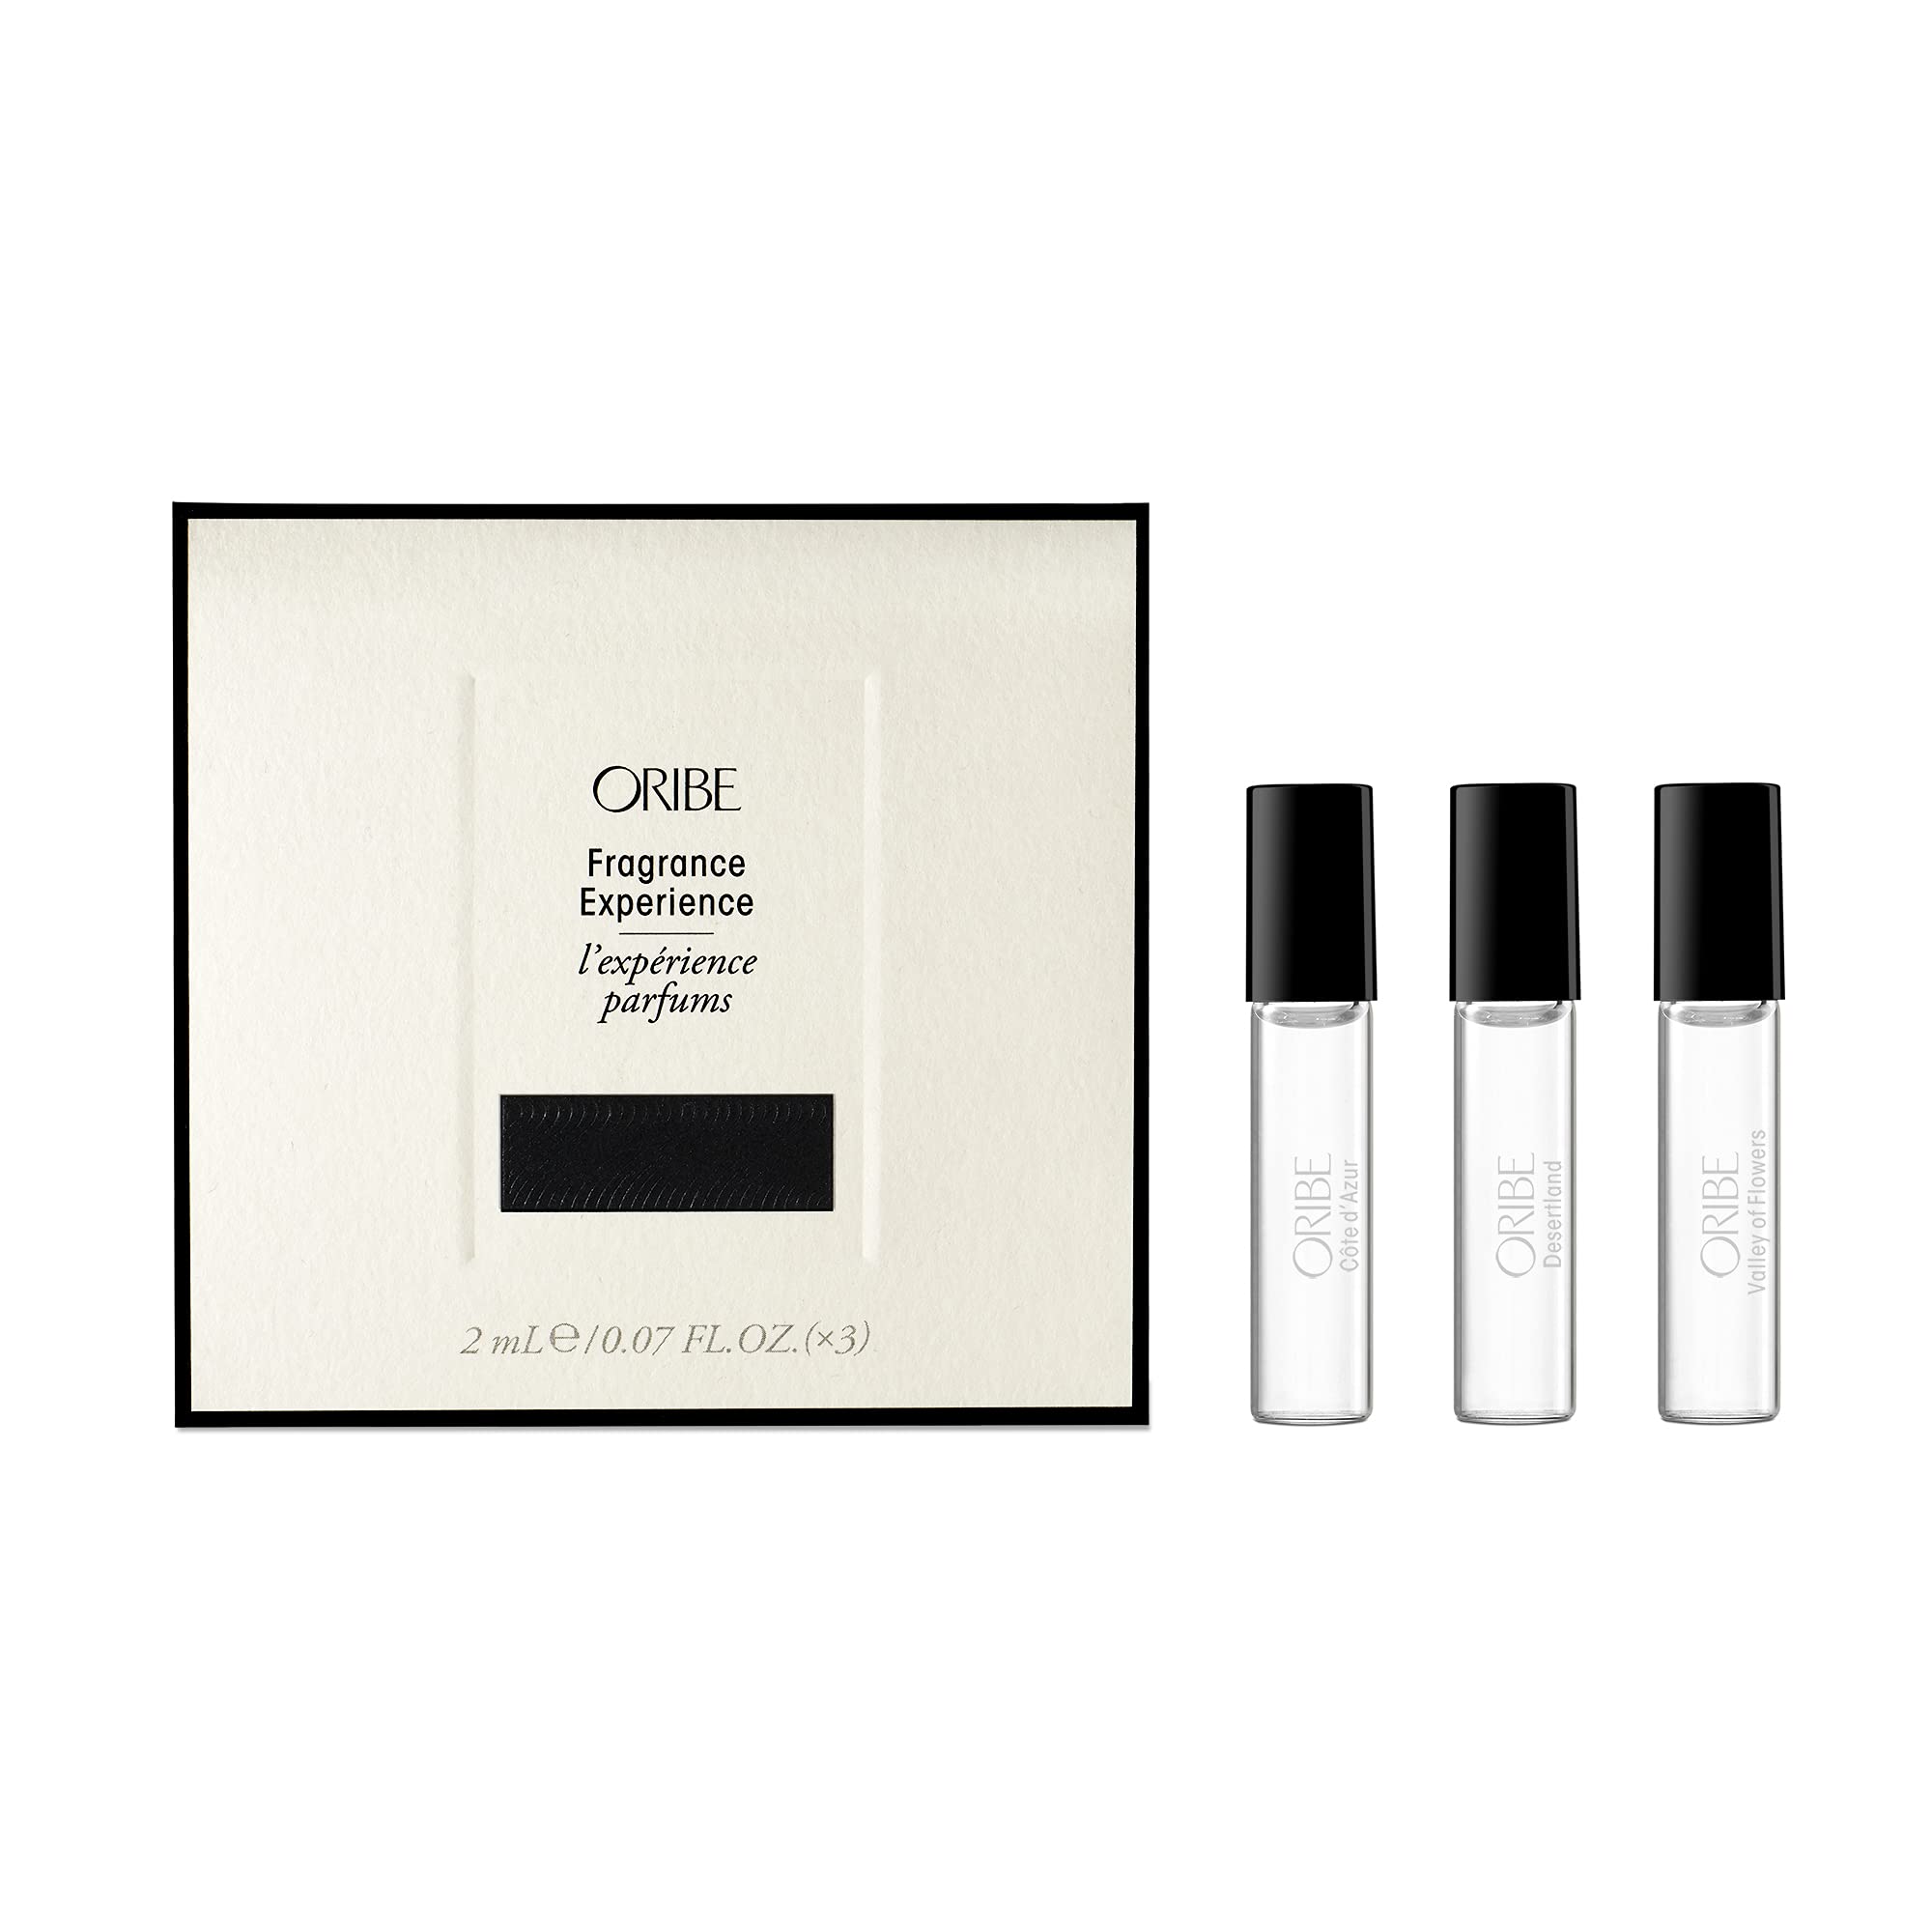 ORIBE Fragrance Discovery Set, 3 ct.